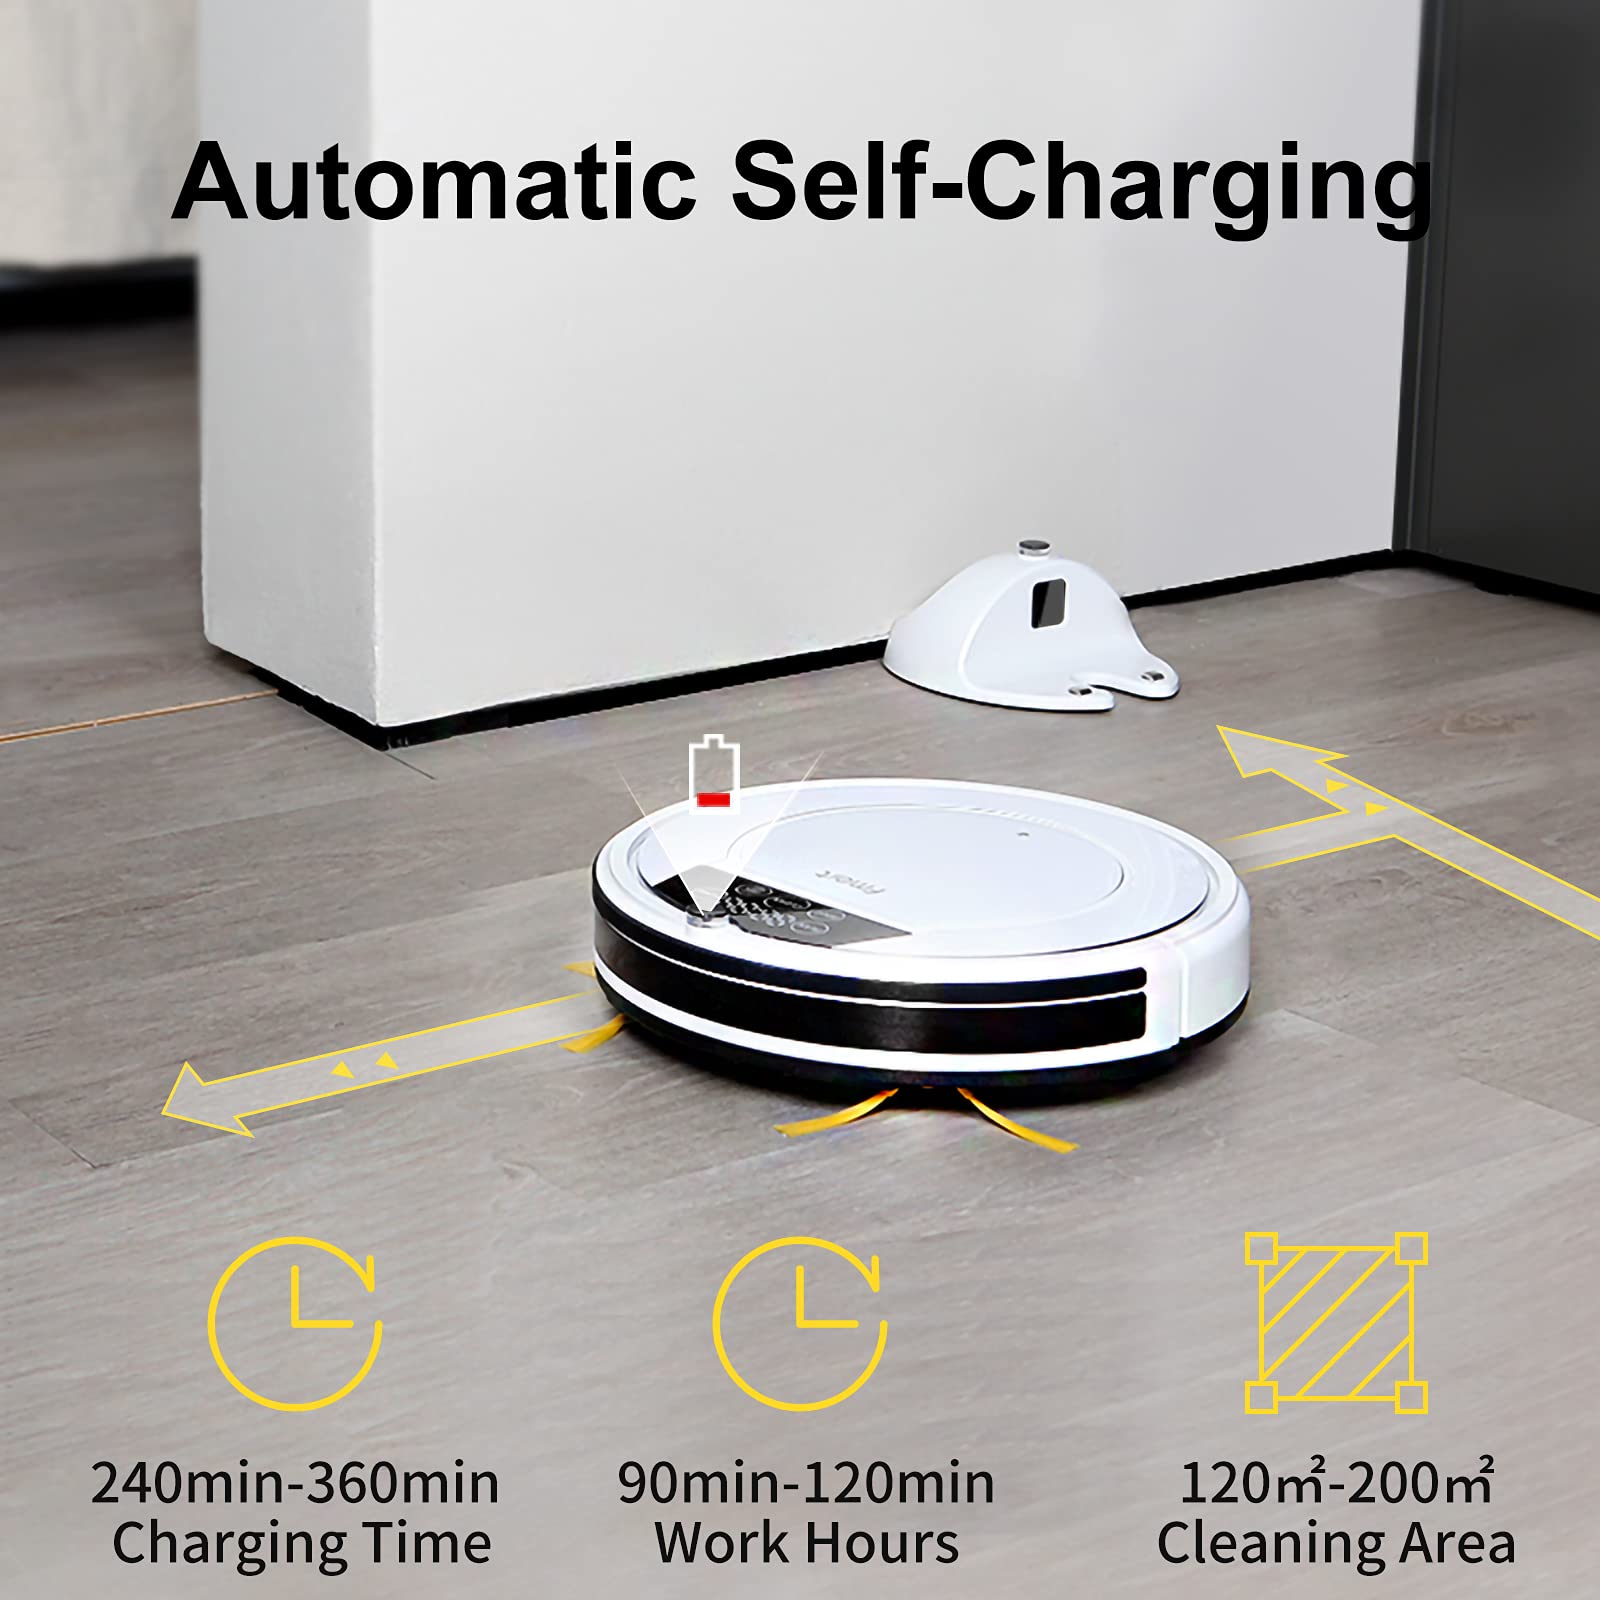 Fmart Robot Vacuum Cleaner, Tangle-free Suction for Pet Hair, Hard Floor, Thin Carpet - Intelligent Cleaning Robot Self-Charge Wet Mopping for Wood Floor, HEPA Filter E-R550W(s) [Energy Class Good]